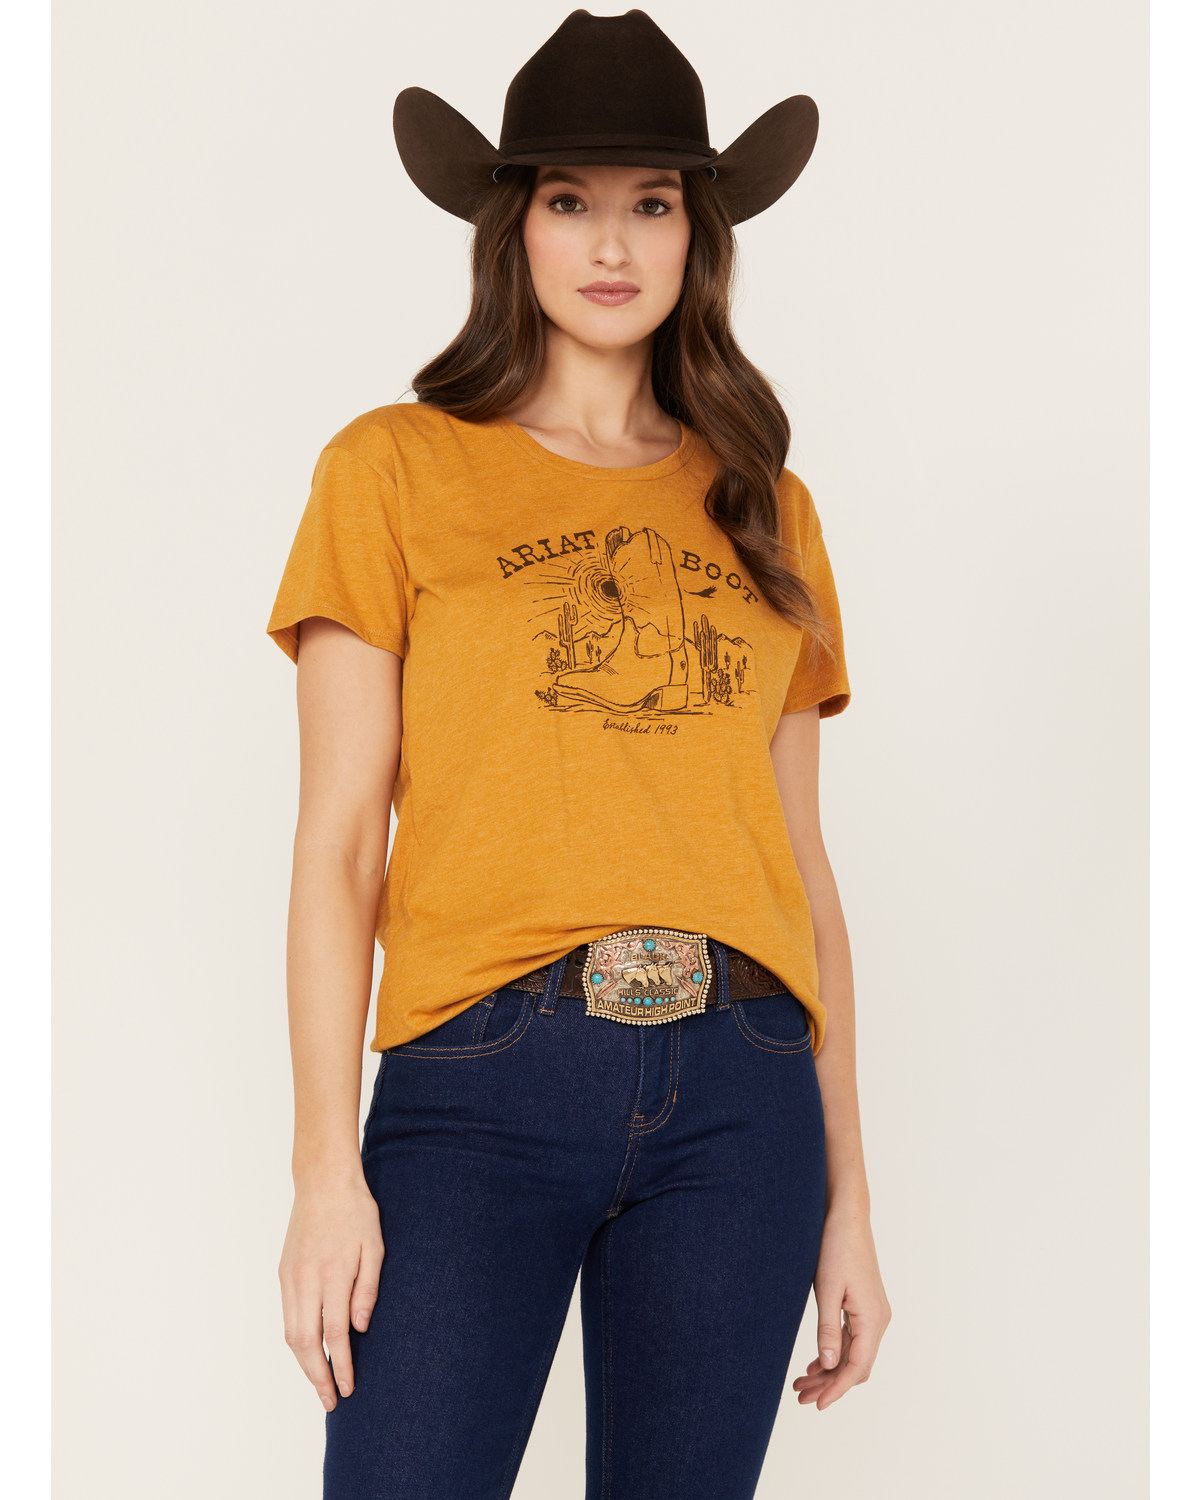 Ariat Women's Bootscape Short Sleeve Graphic Tee